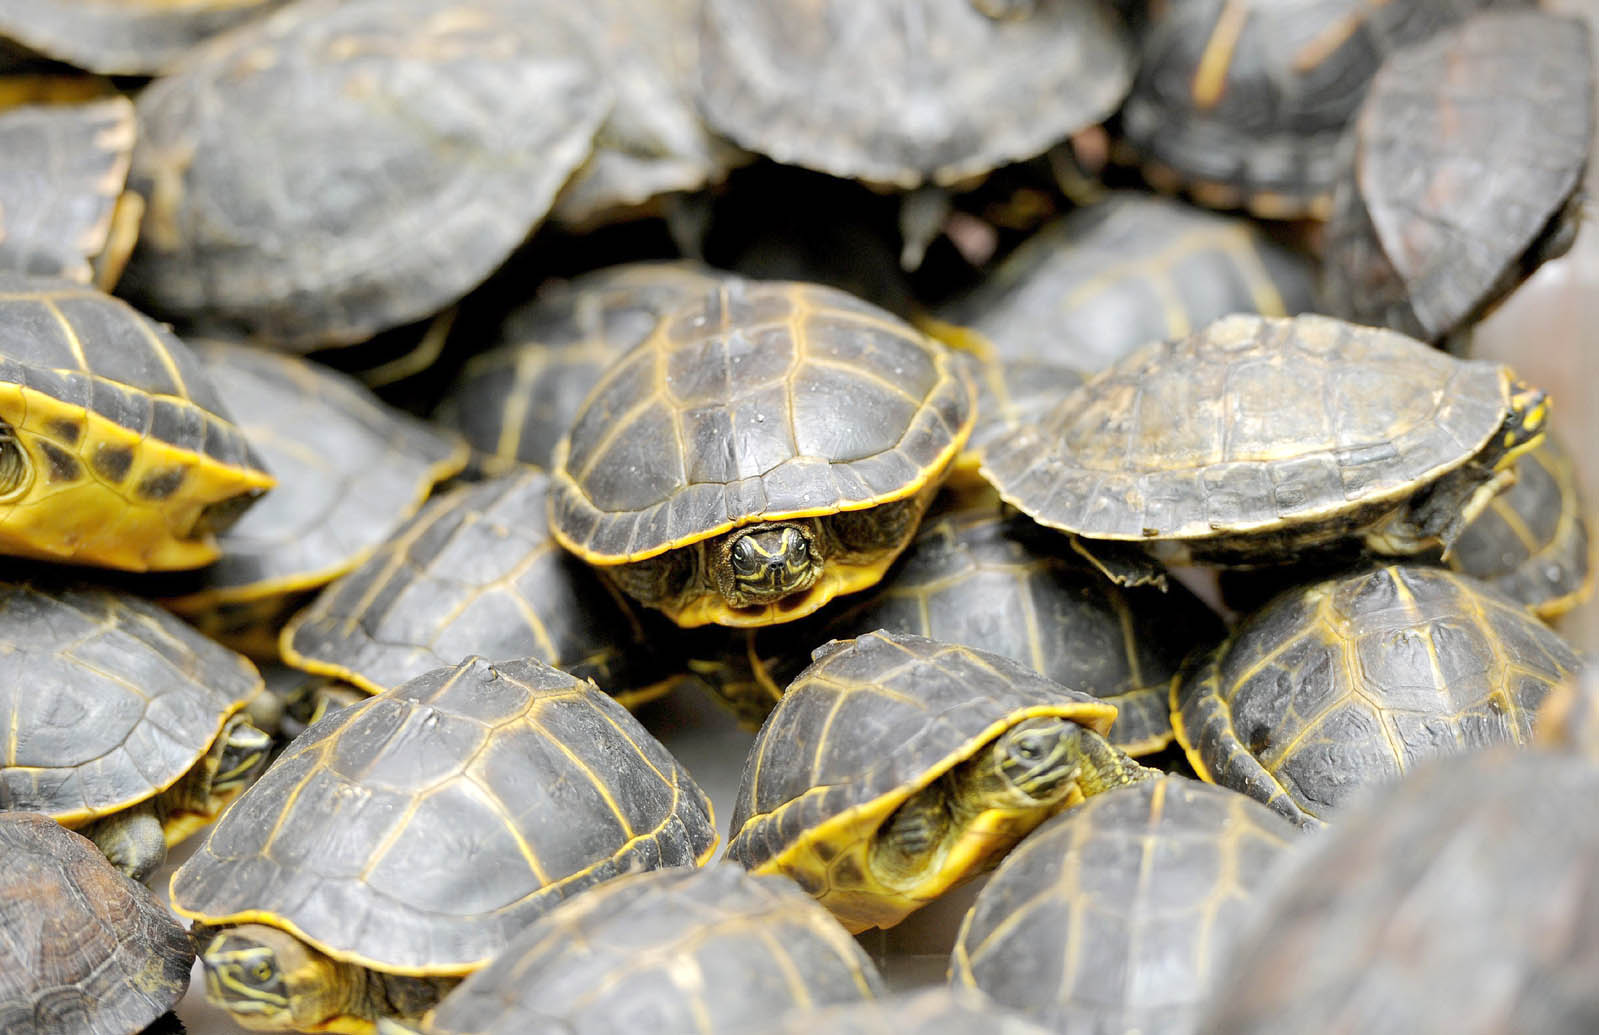 customs superintendent suhail qureshi said the turtles packed in a carton were being smuggled by saeed ahmed faraz a resident of lahore photo afp file